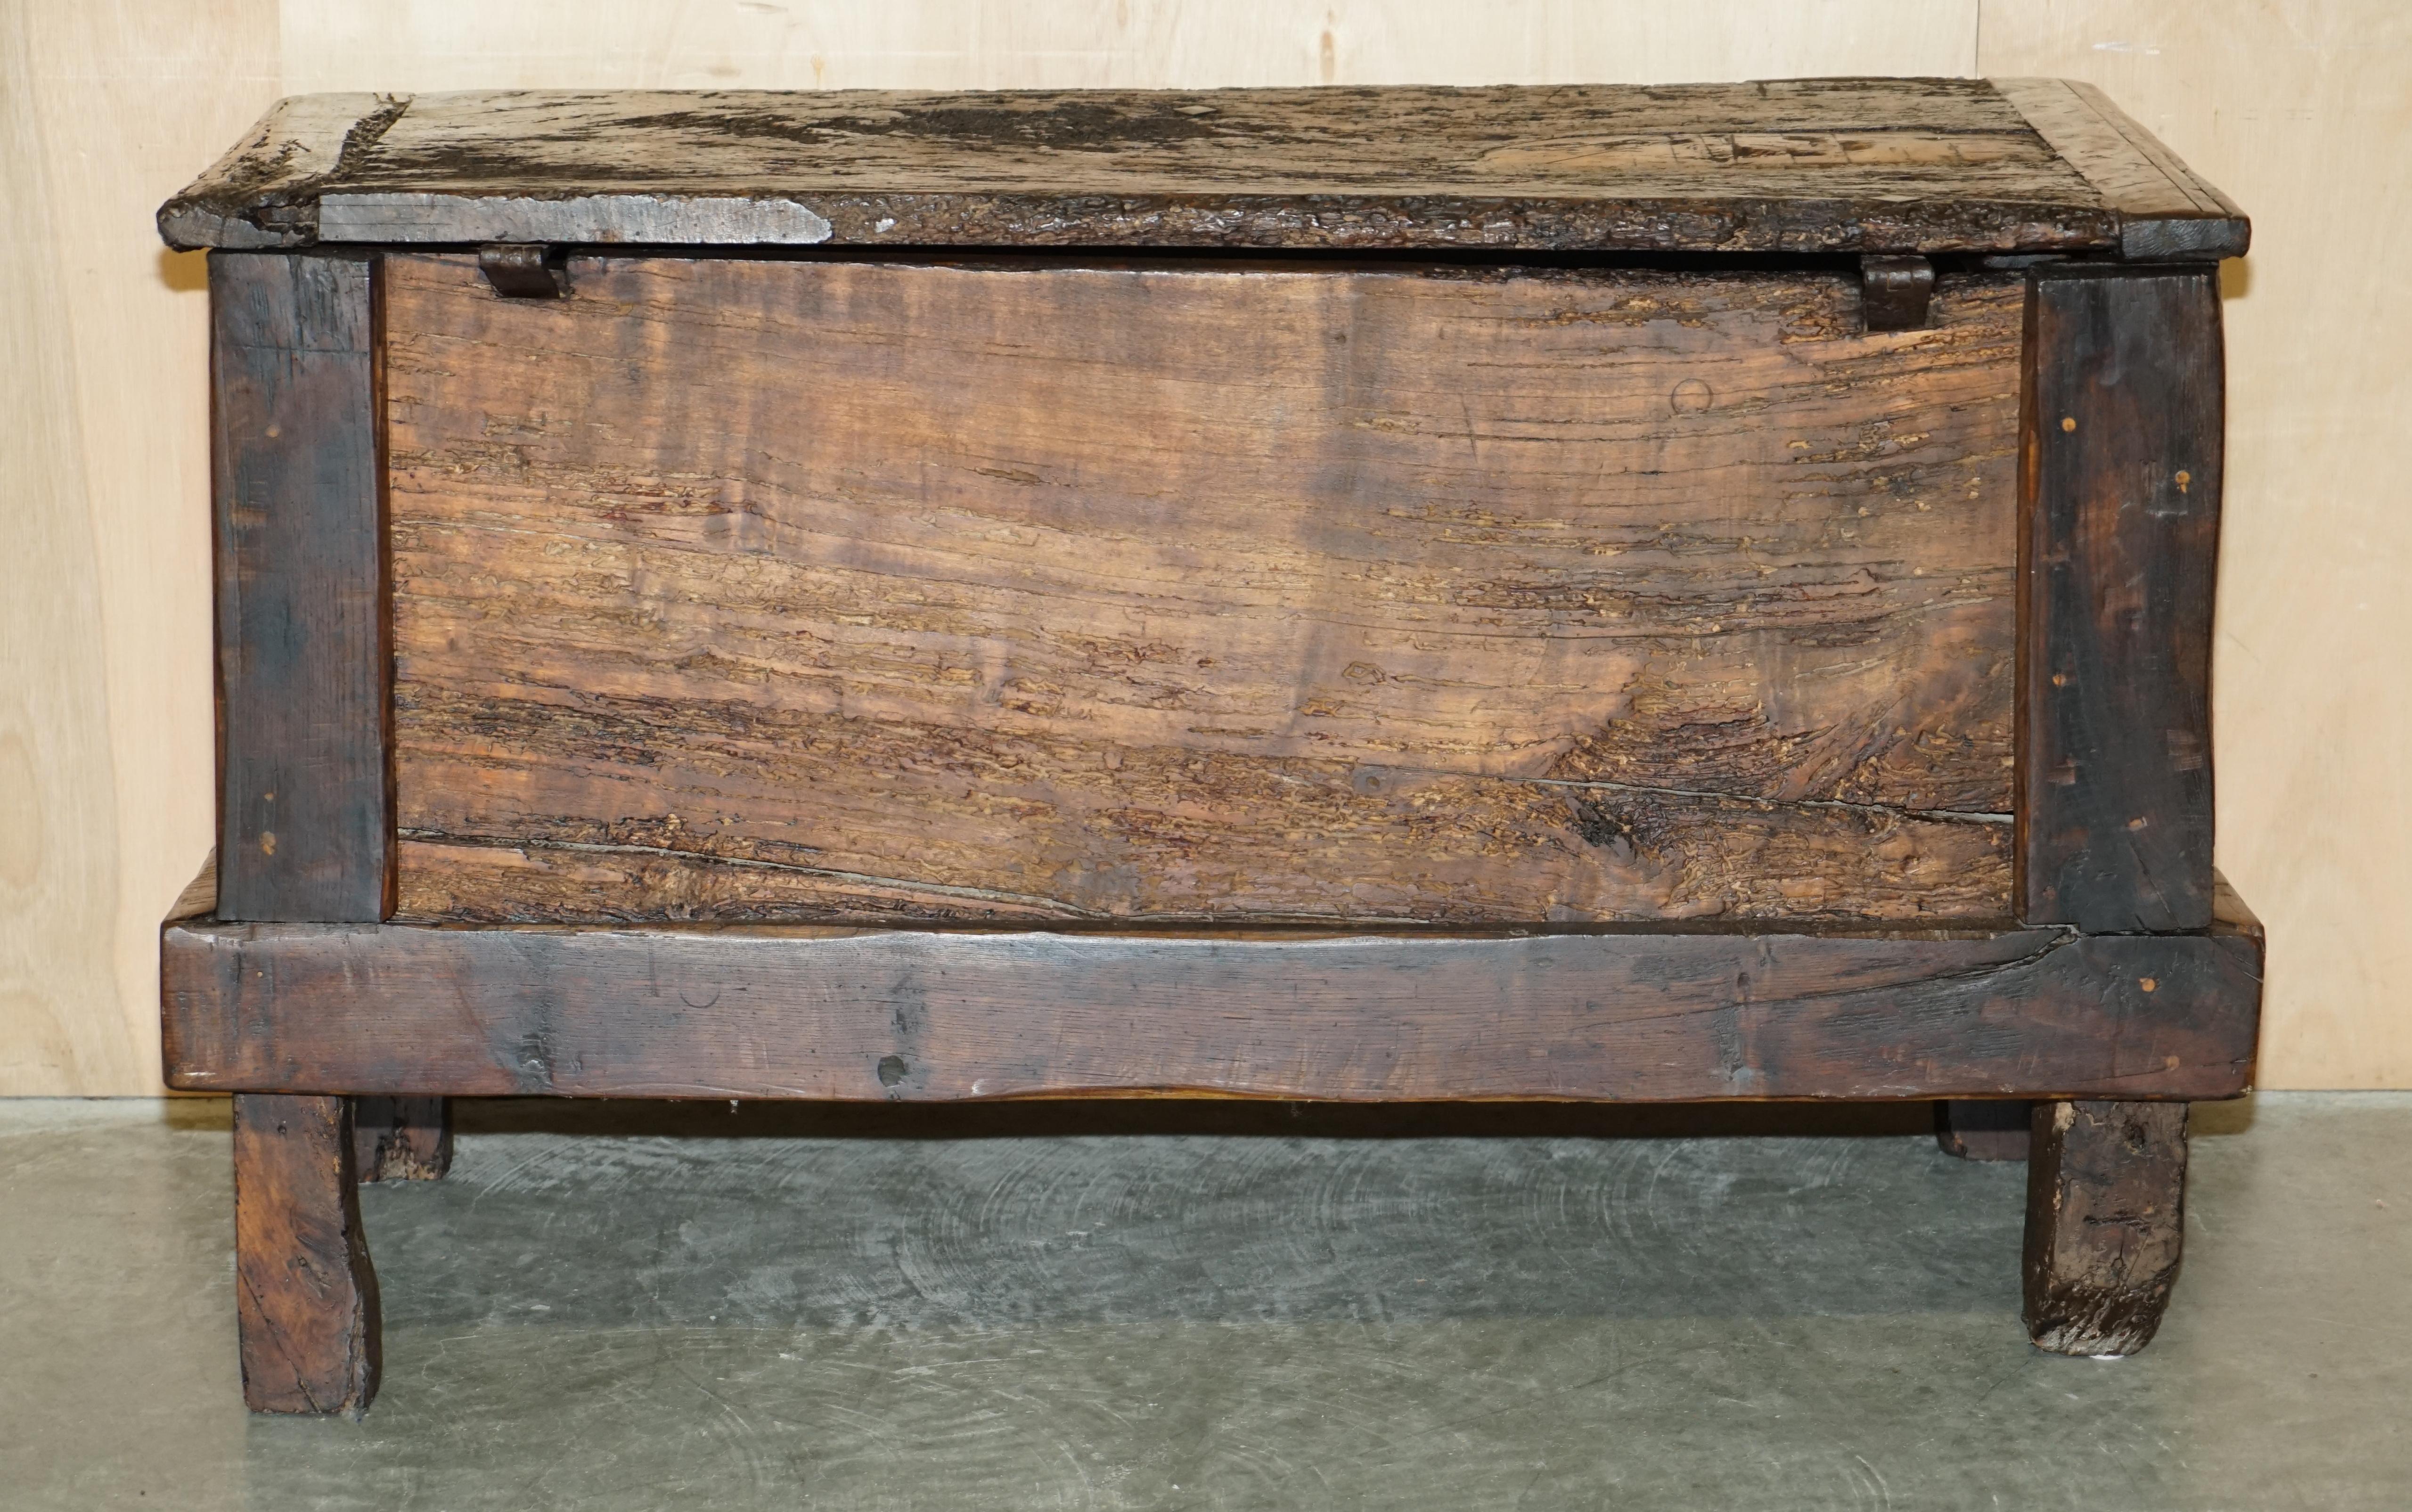 ANTiQUE 18TH CENTURY SIX PLANK HEAVILY BURRED CHESTNUT WOOD TRUNK CHEST For Sale 10